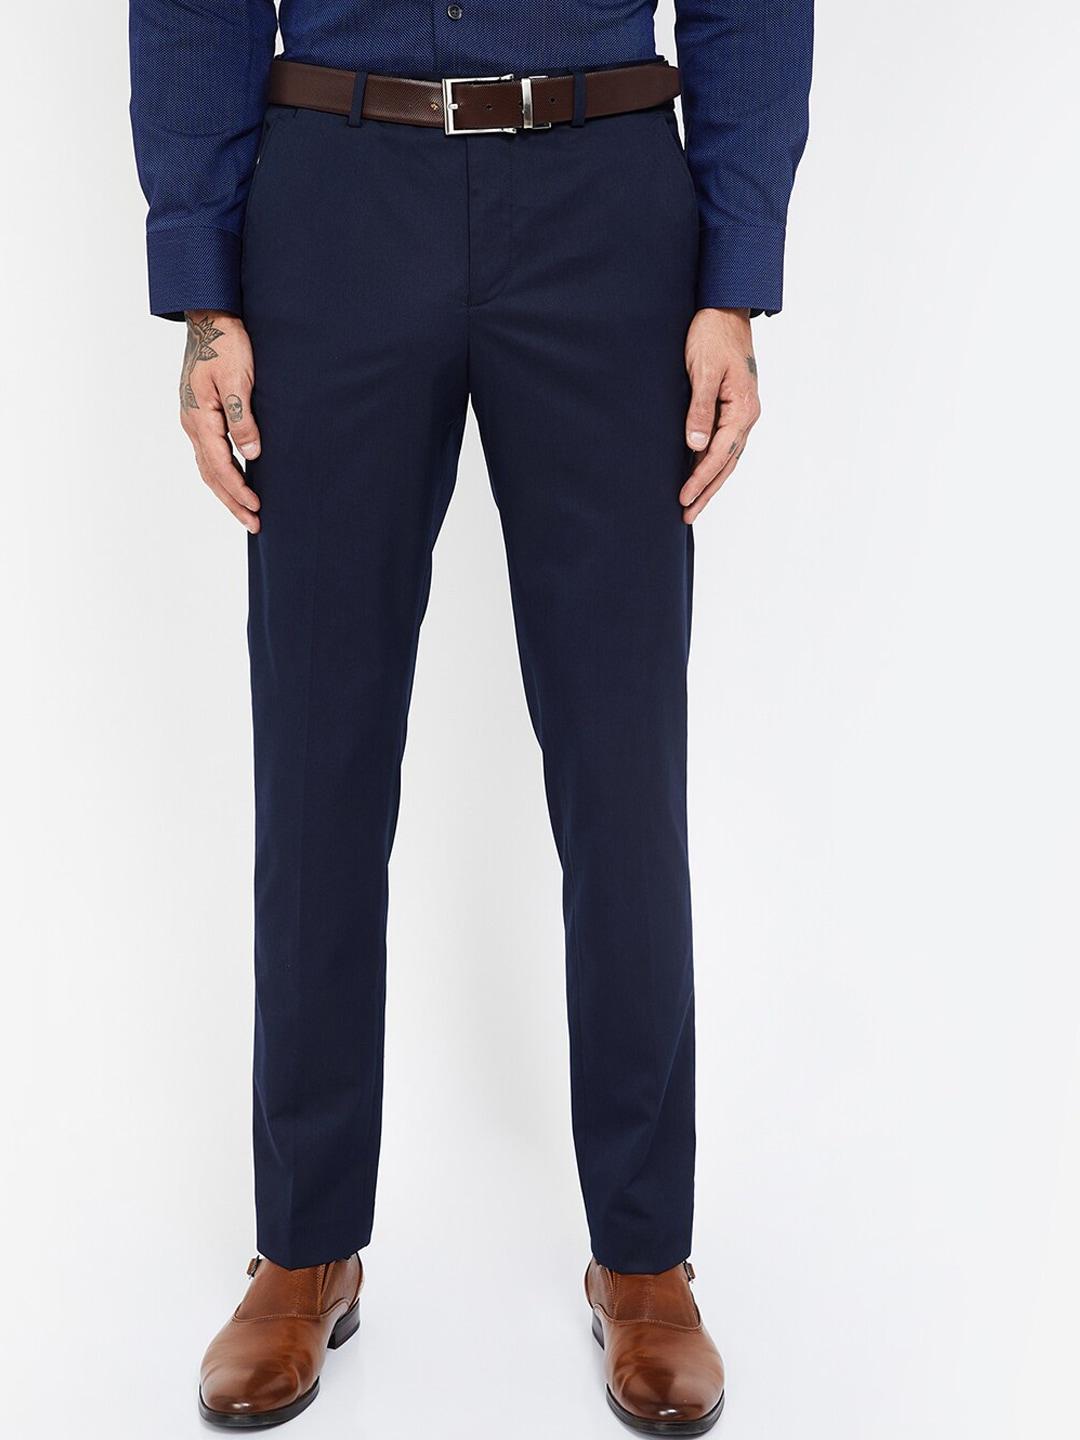 code by lifestyle men navy blue slim fit solid regular trousers